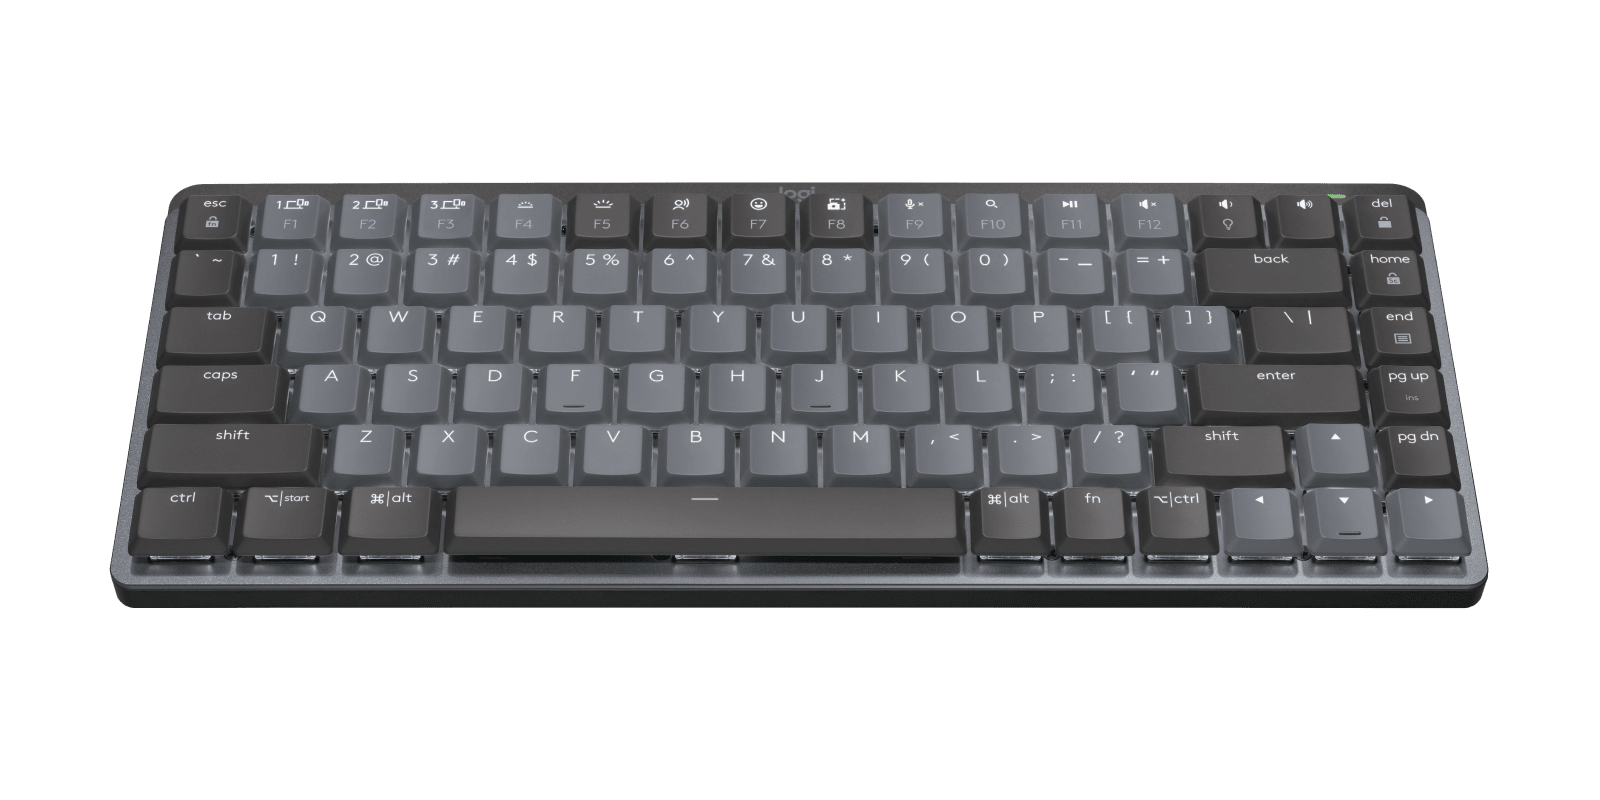 https://www.moderncoup.com/wp-content/uploads/2022/09/mx-mechanical-mini-keyboard-top-side-view-graphite-us.png